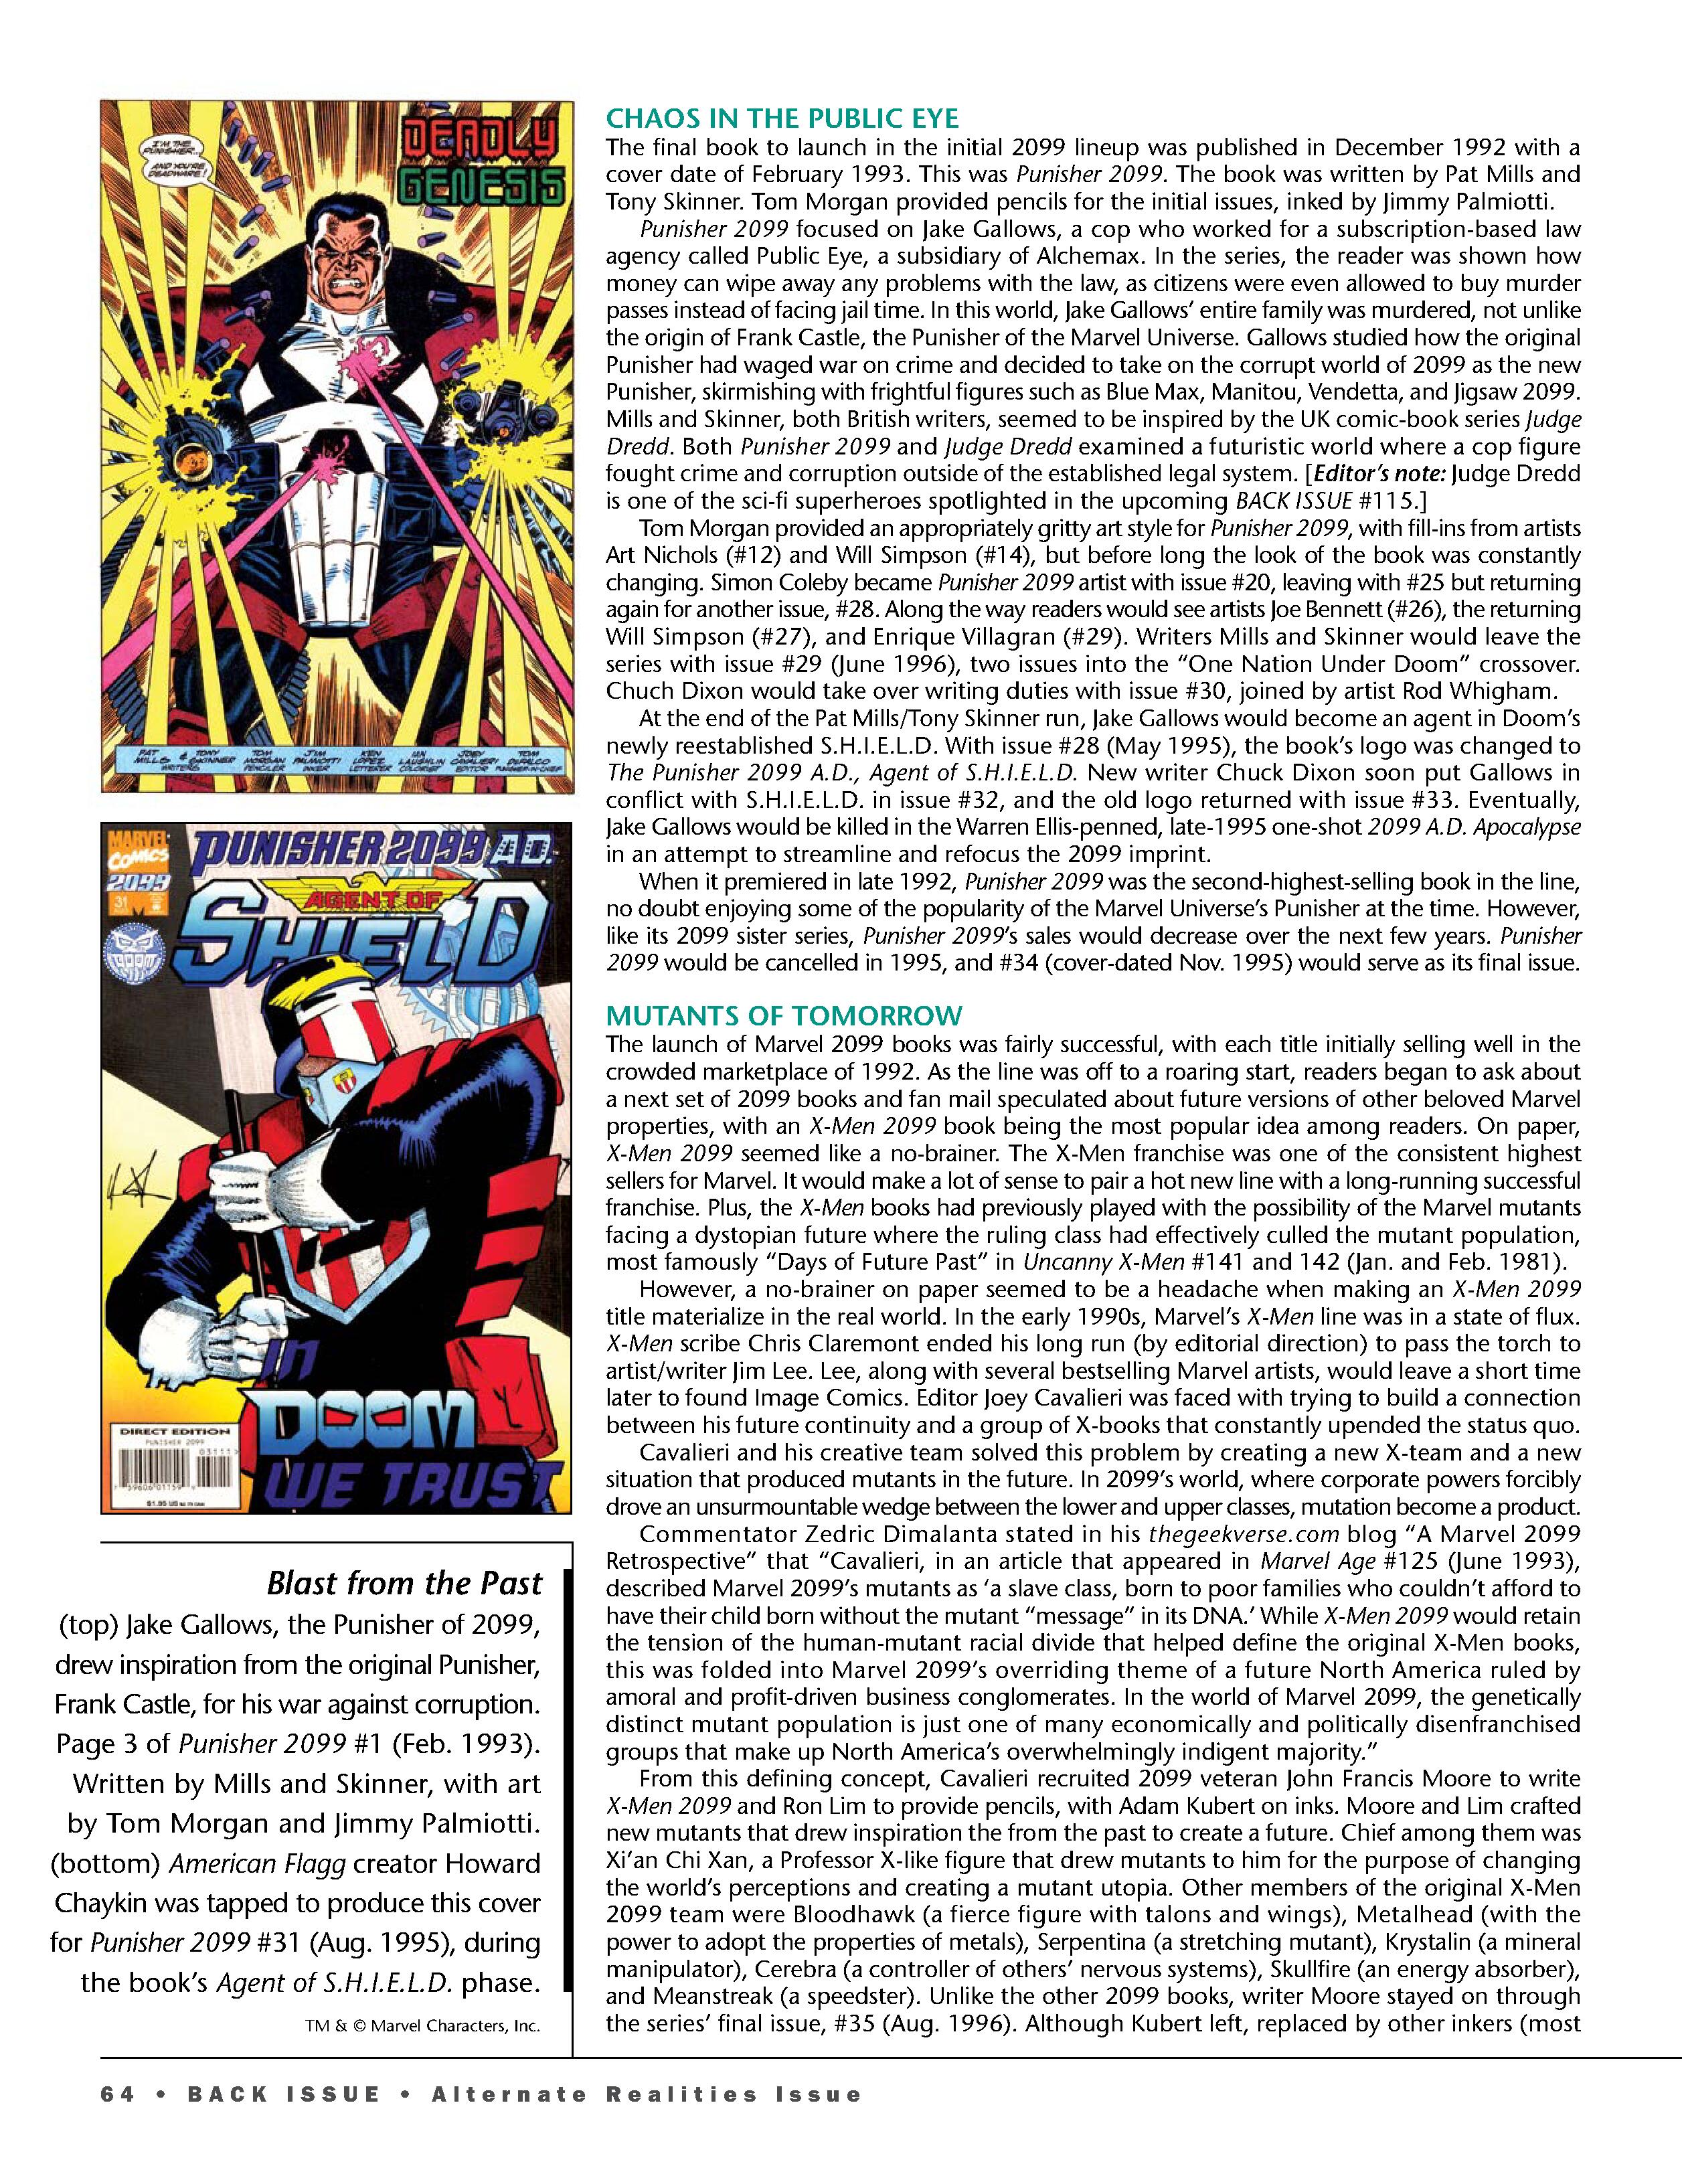 Read online Back Issue comic -  Issue #111 - 66